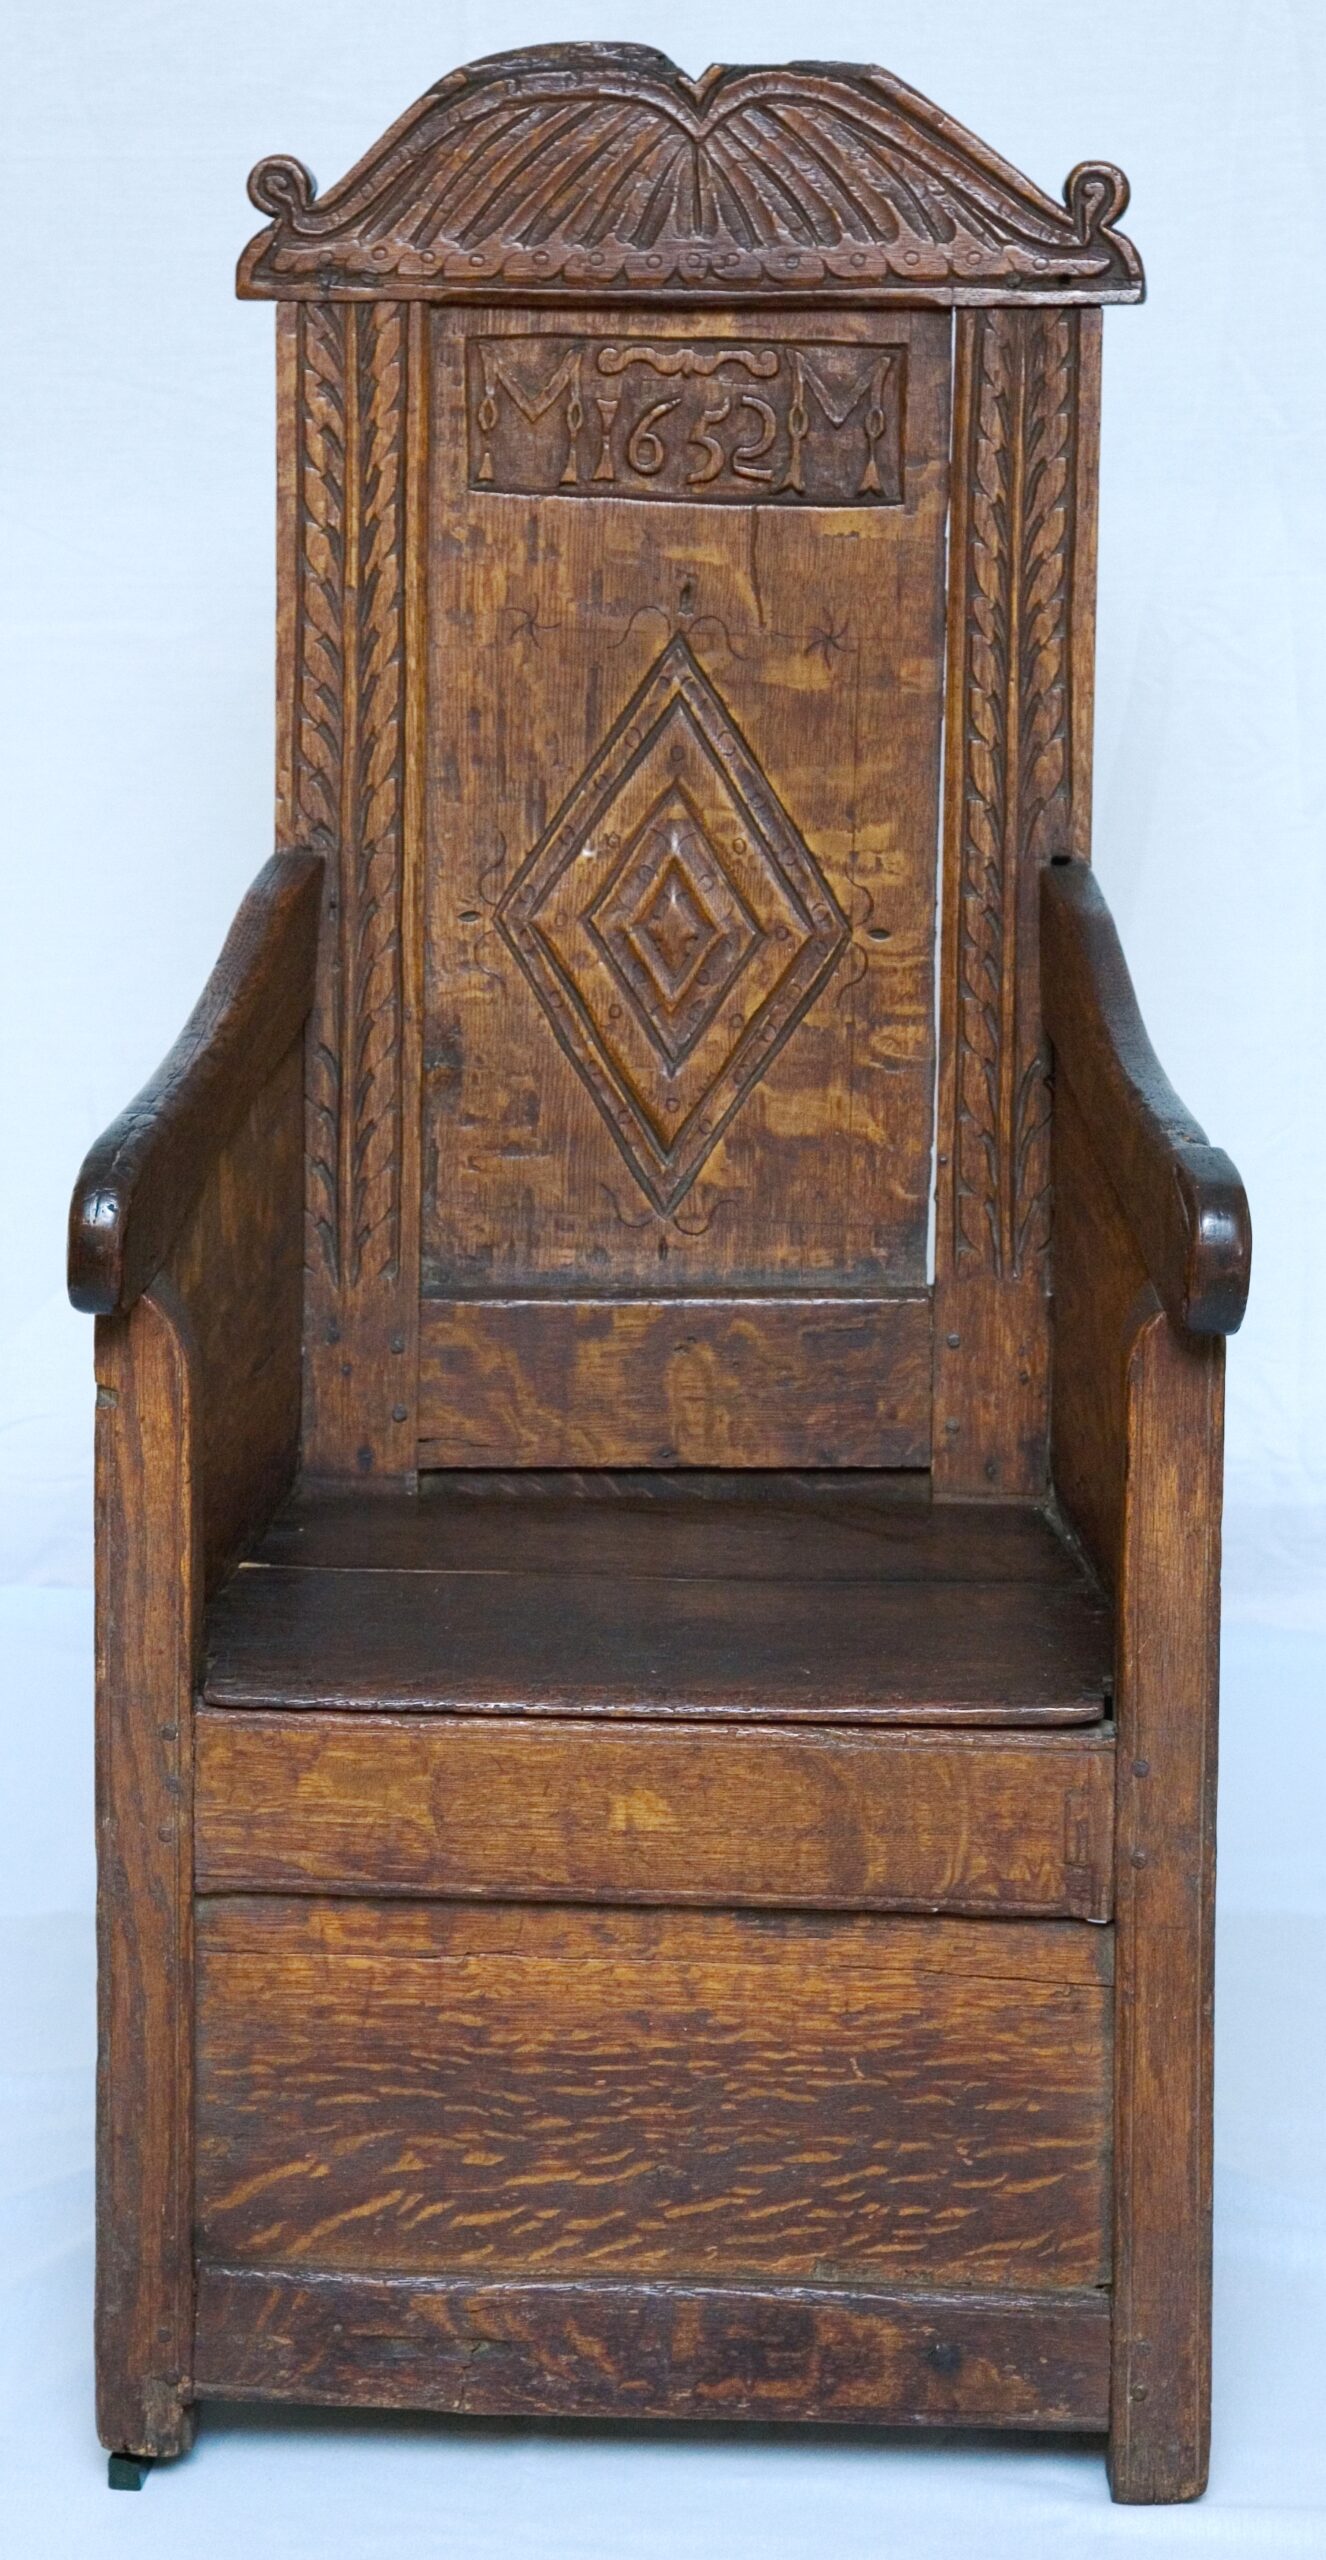 Earliest dated chair from our collections